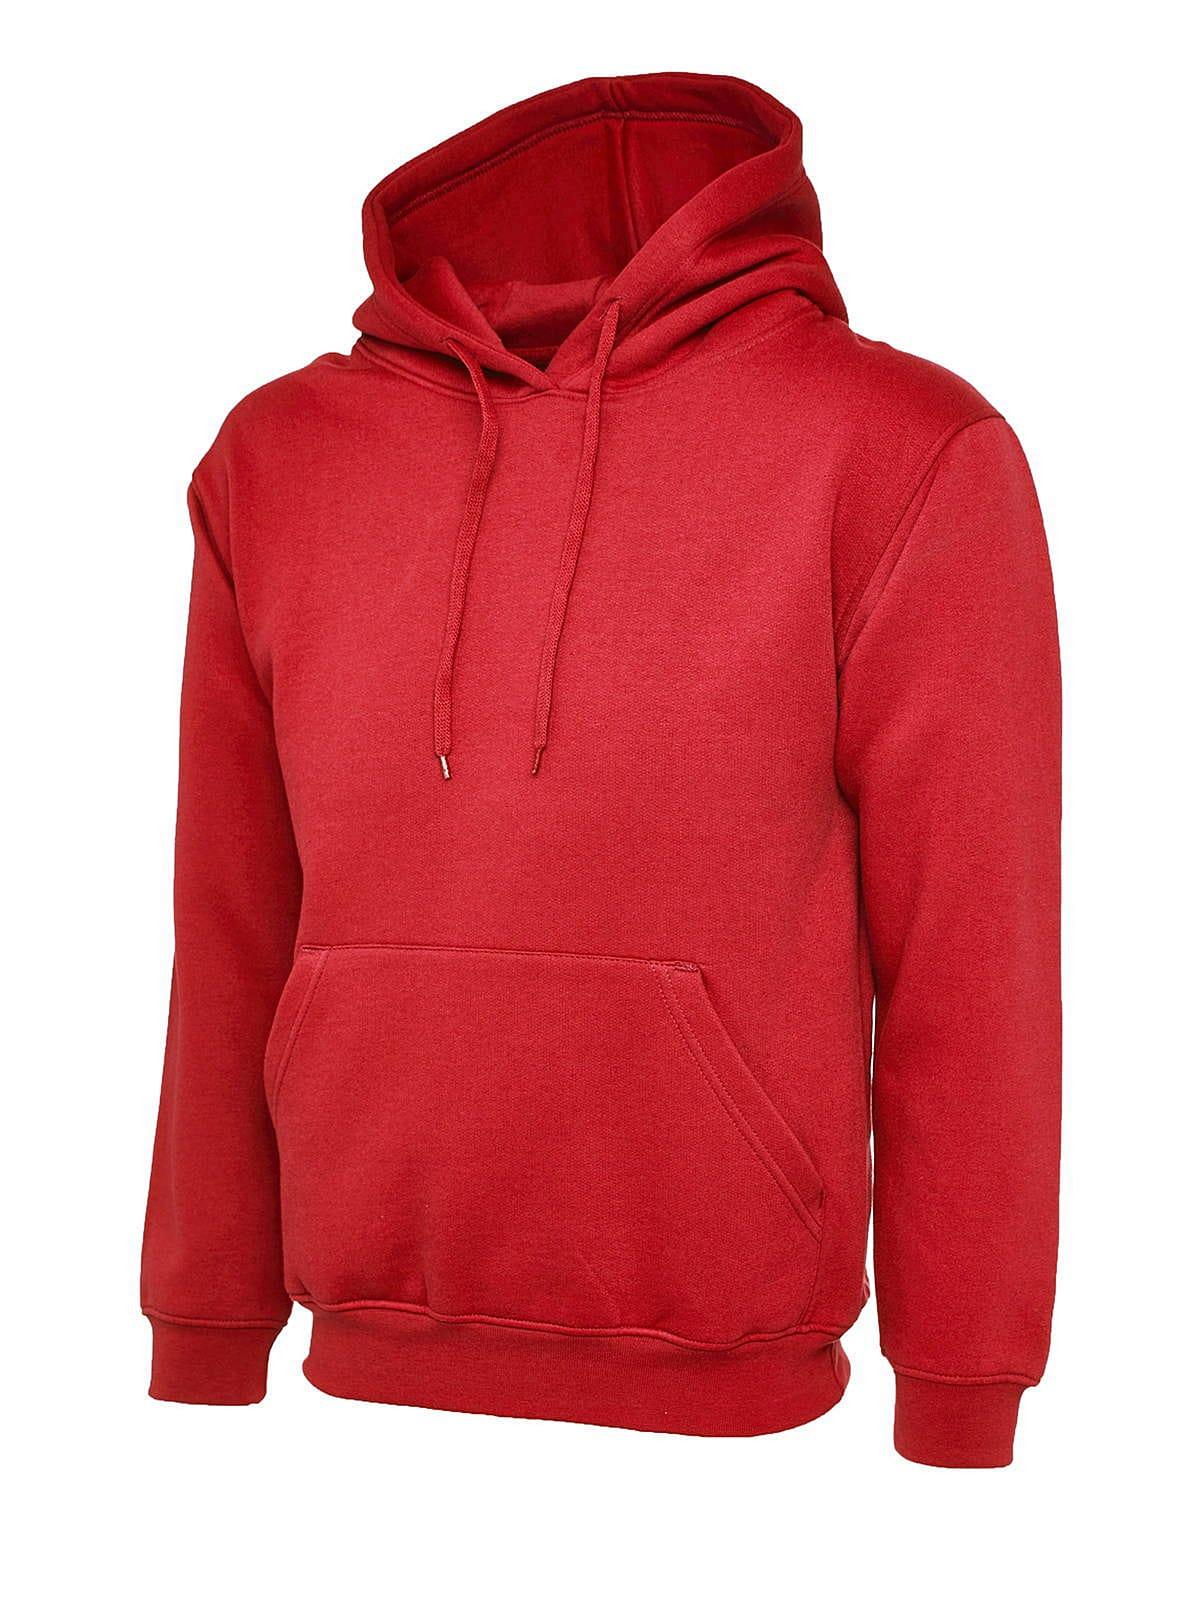 Uneek 300GSM Classic Hoodie in Red (Product Code: UC502)